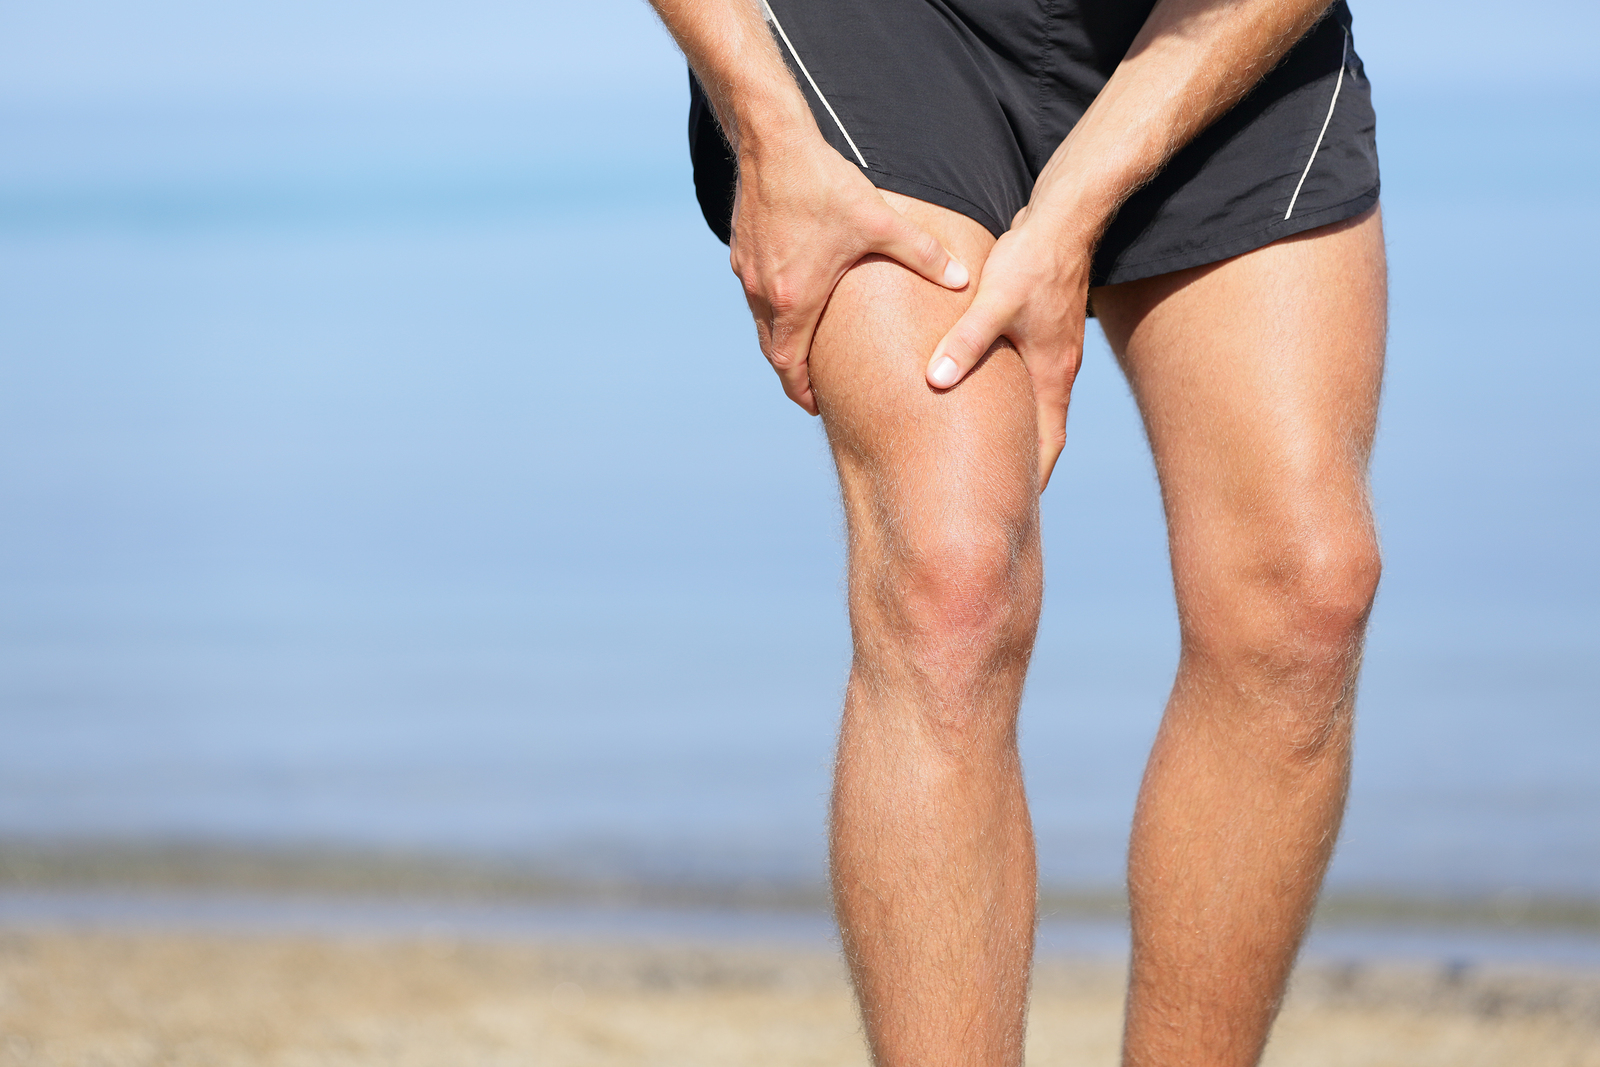 4 Natural Ways To Promote Healing From Sports Injuries